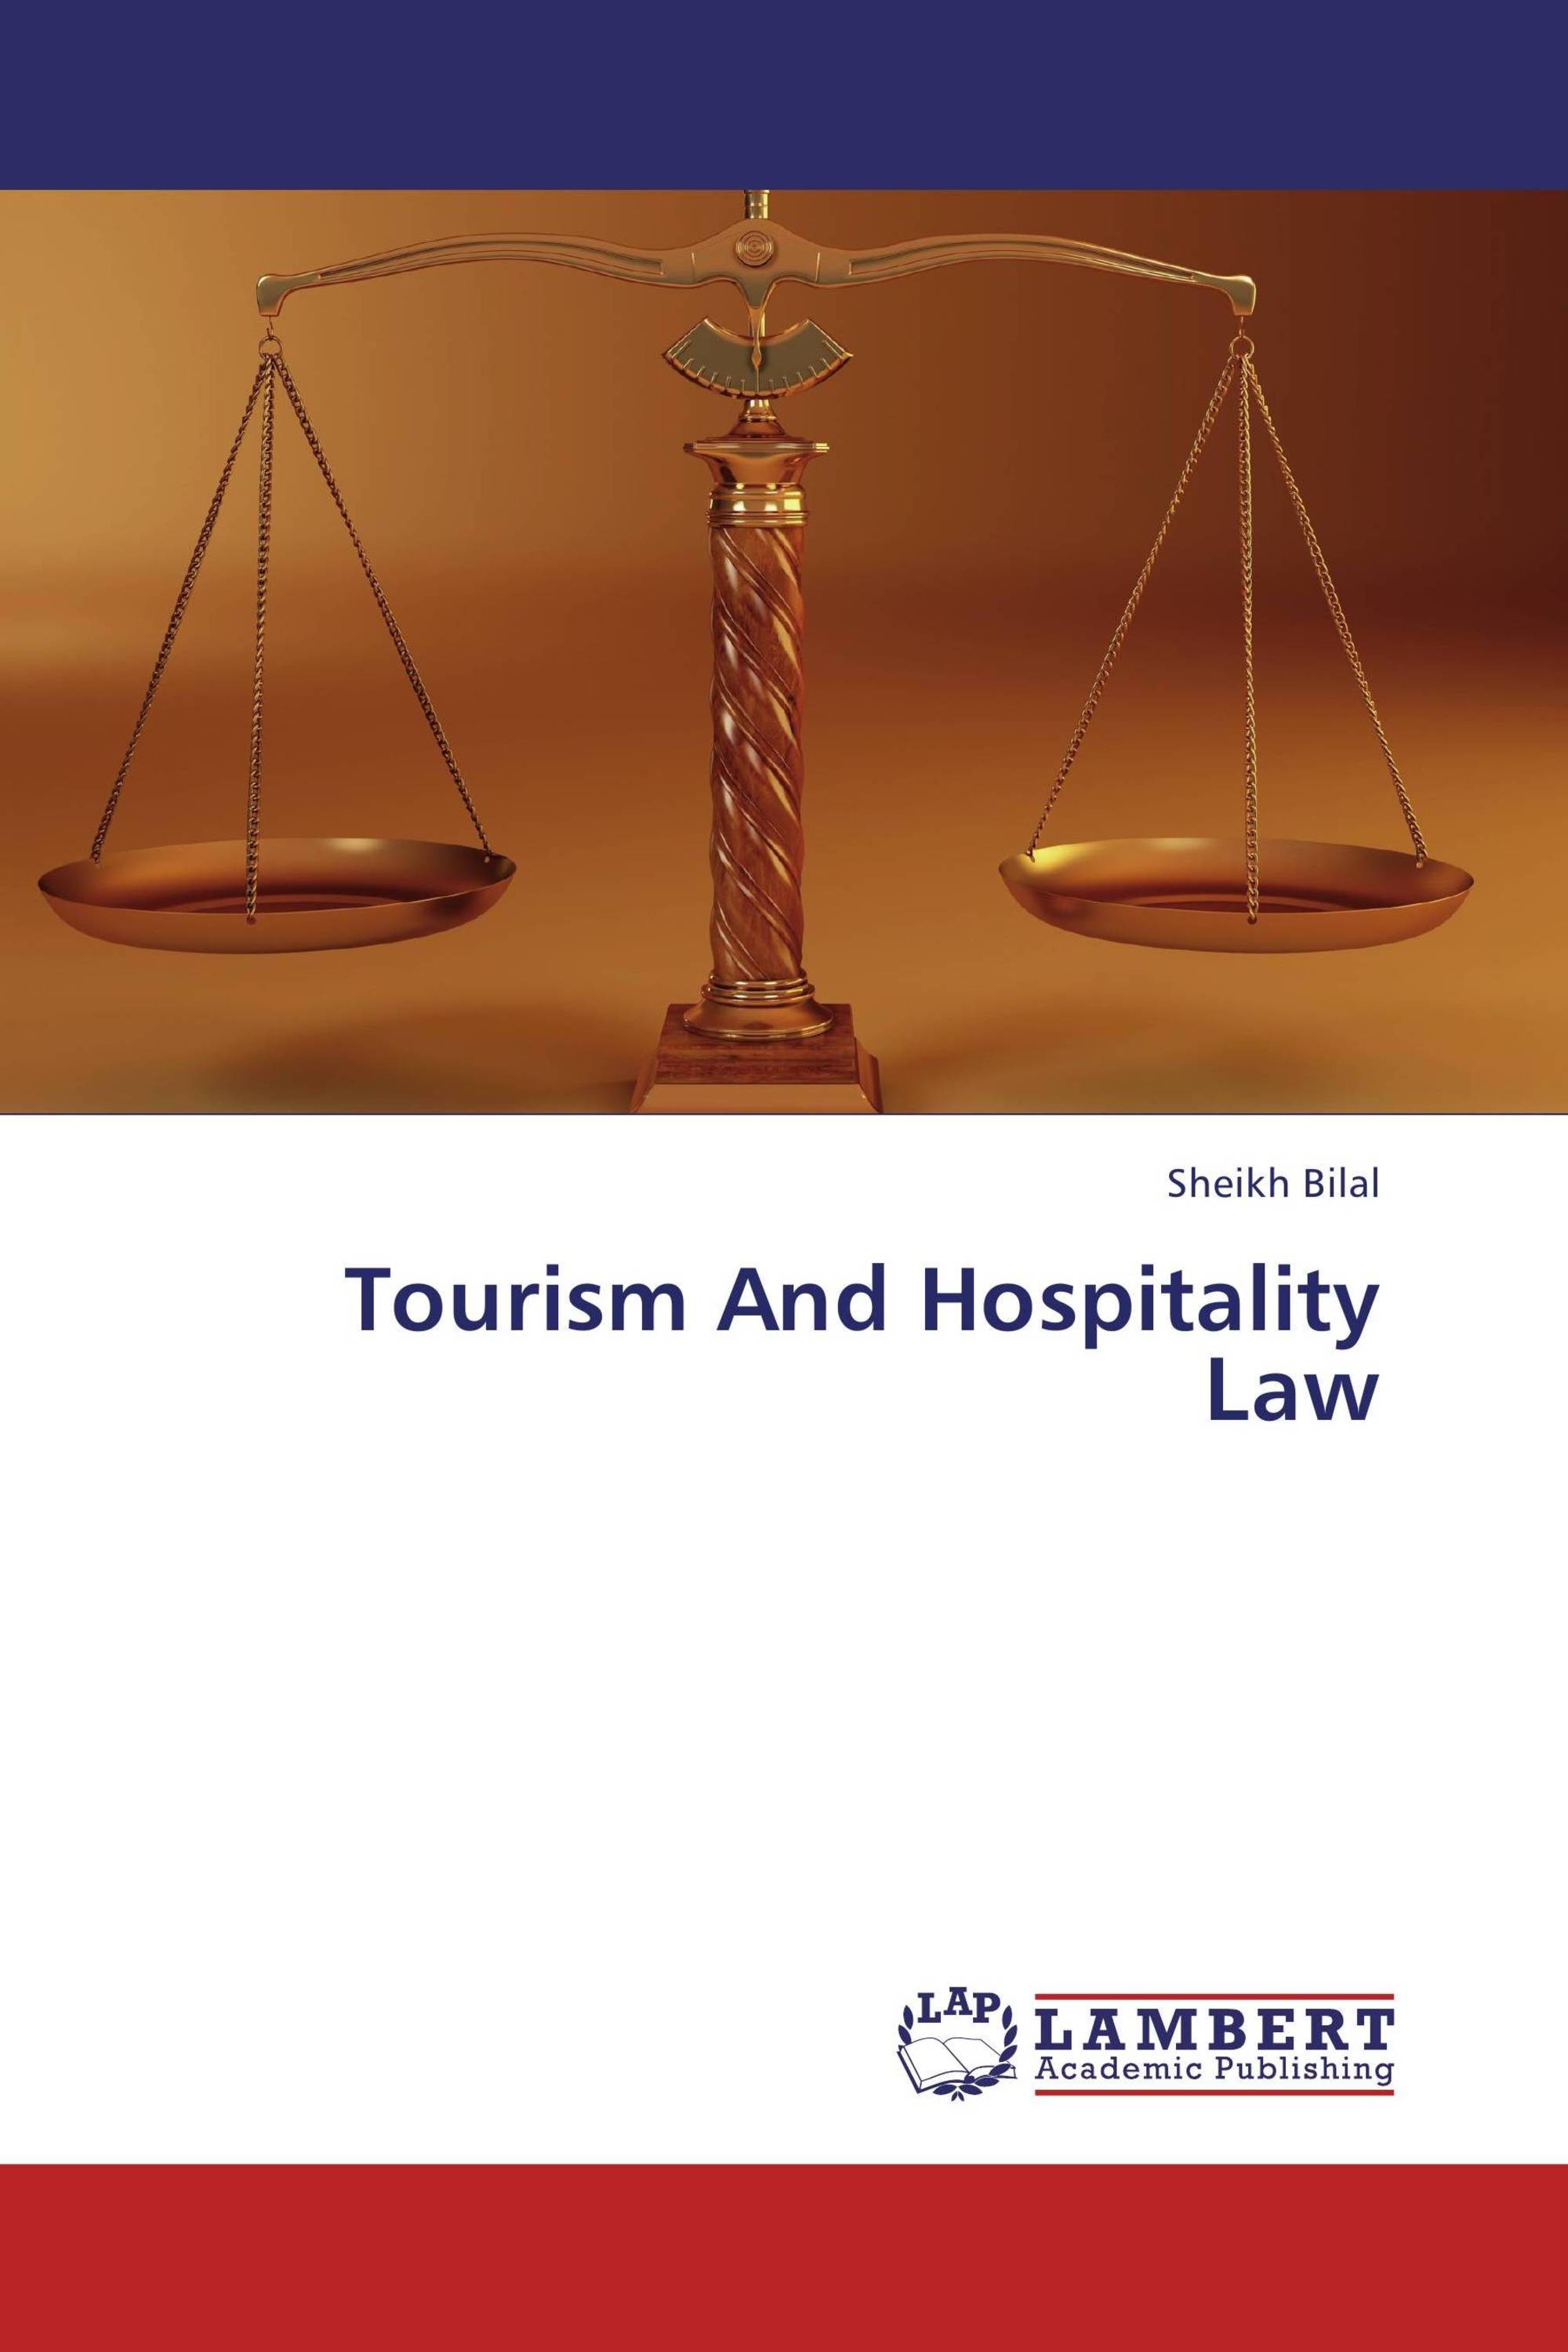 tourism law is